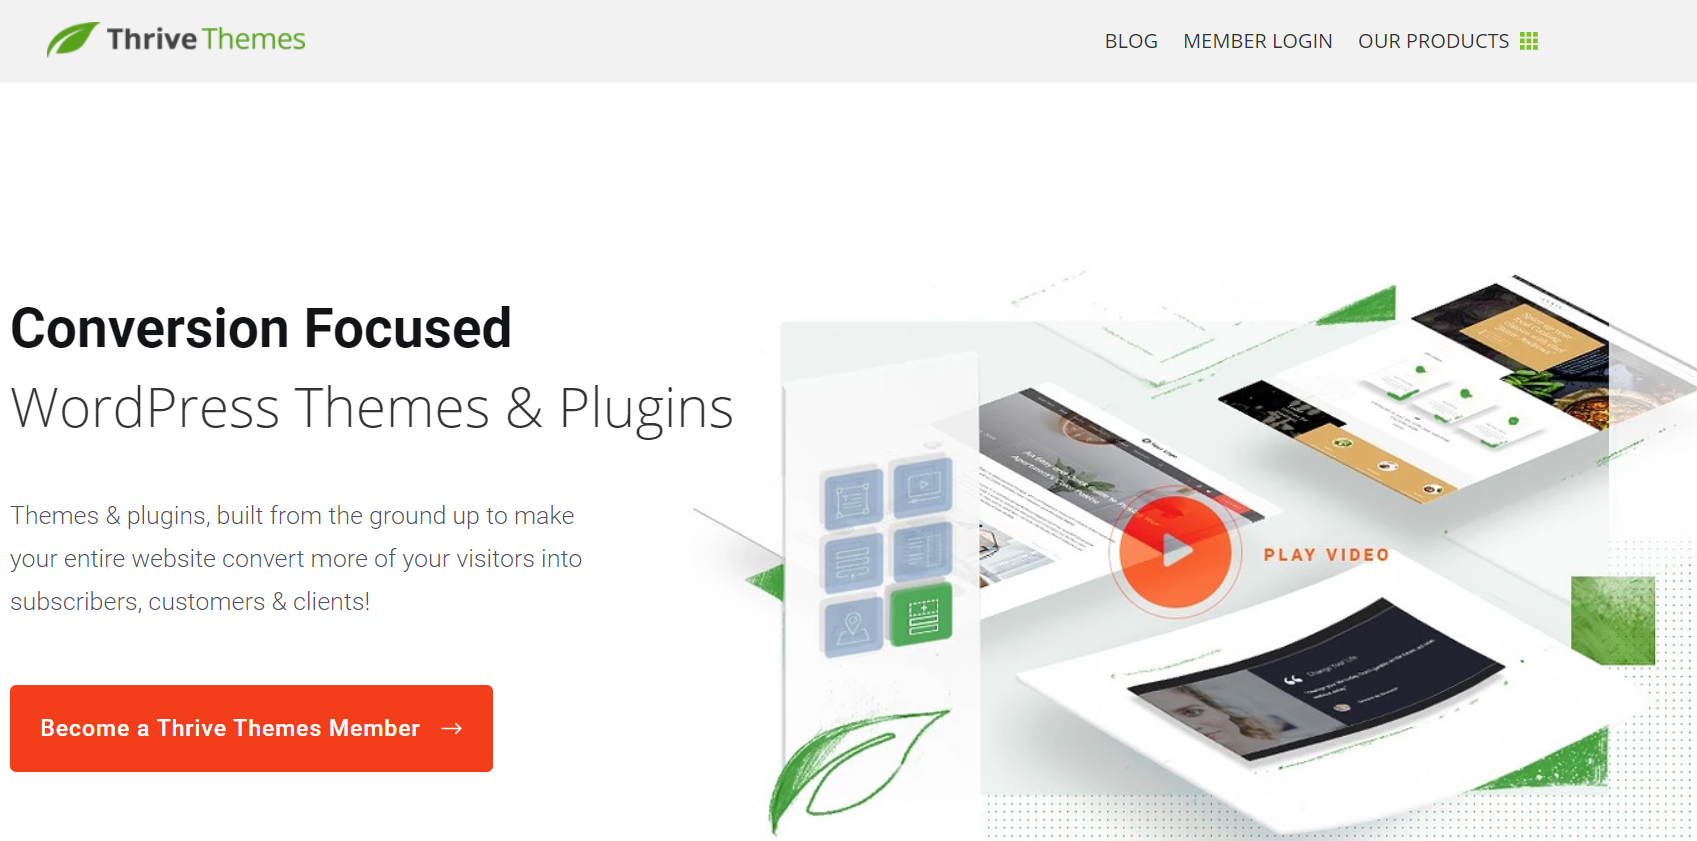 LeadPages Alternatives- Thrive Themes